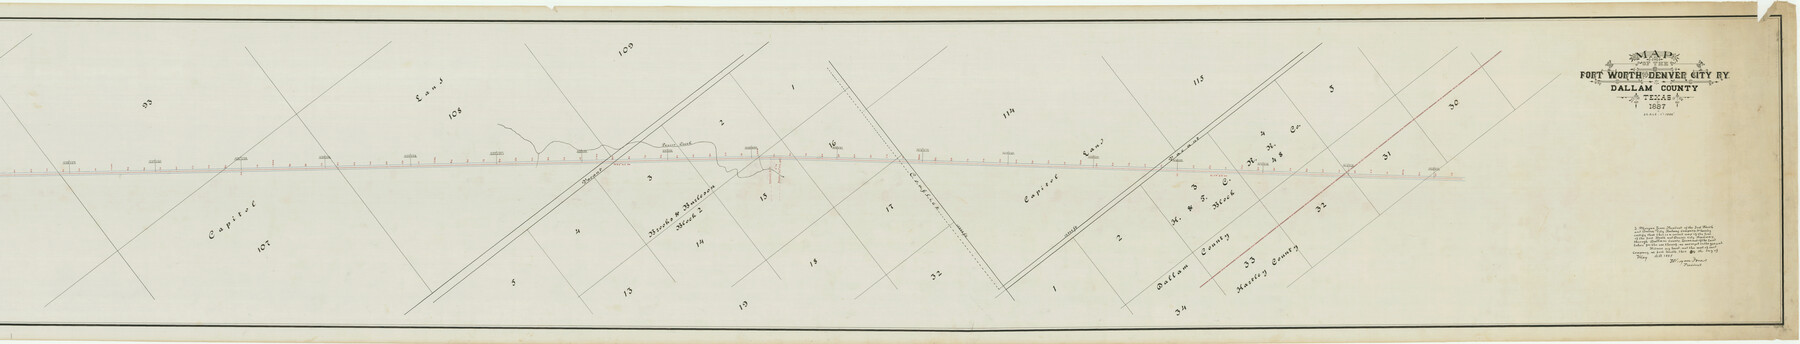 64352, Map of the Fort Worth & Denver City Ry., Dallam County, Texas, General Map Collection